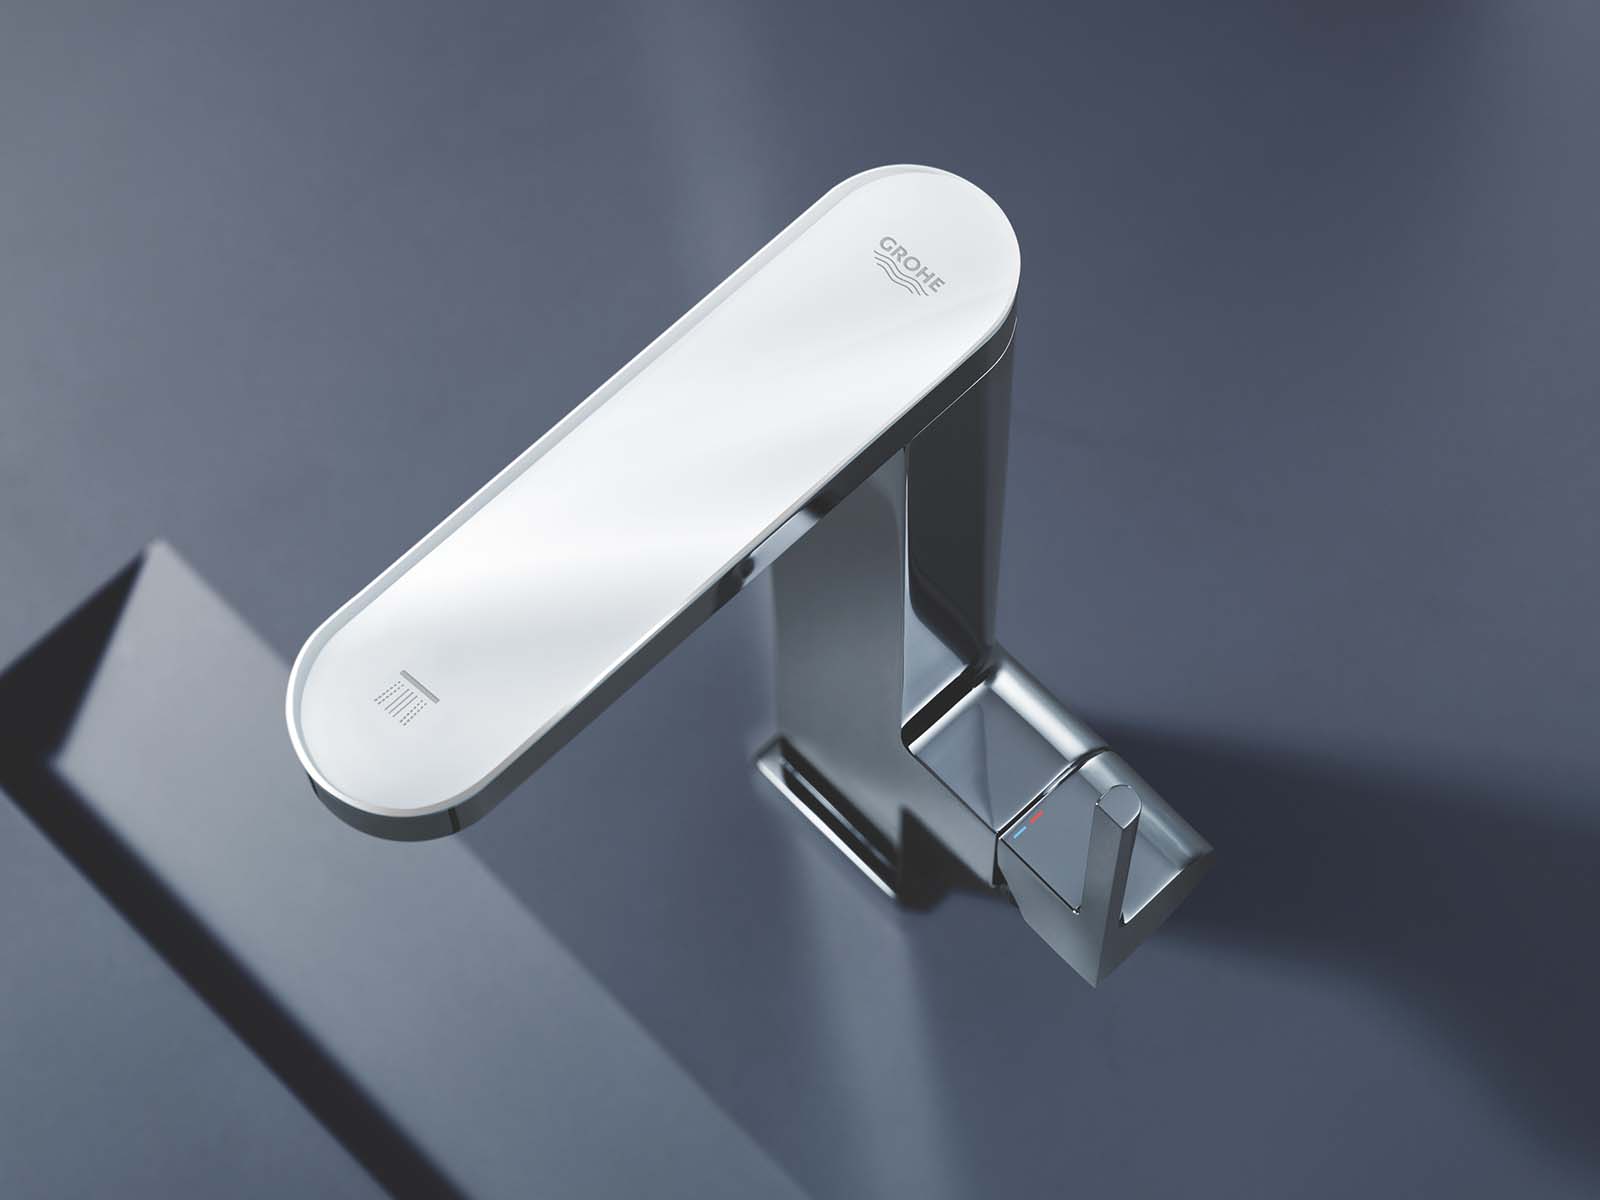 GROHE Plus by GROHE.